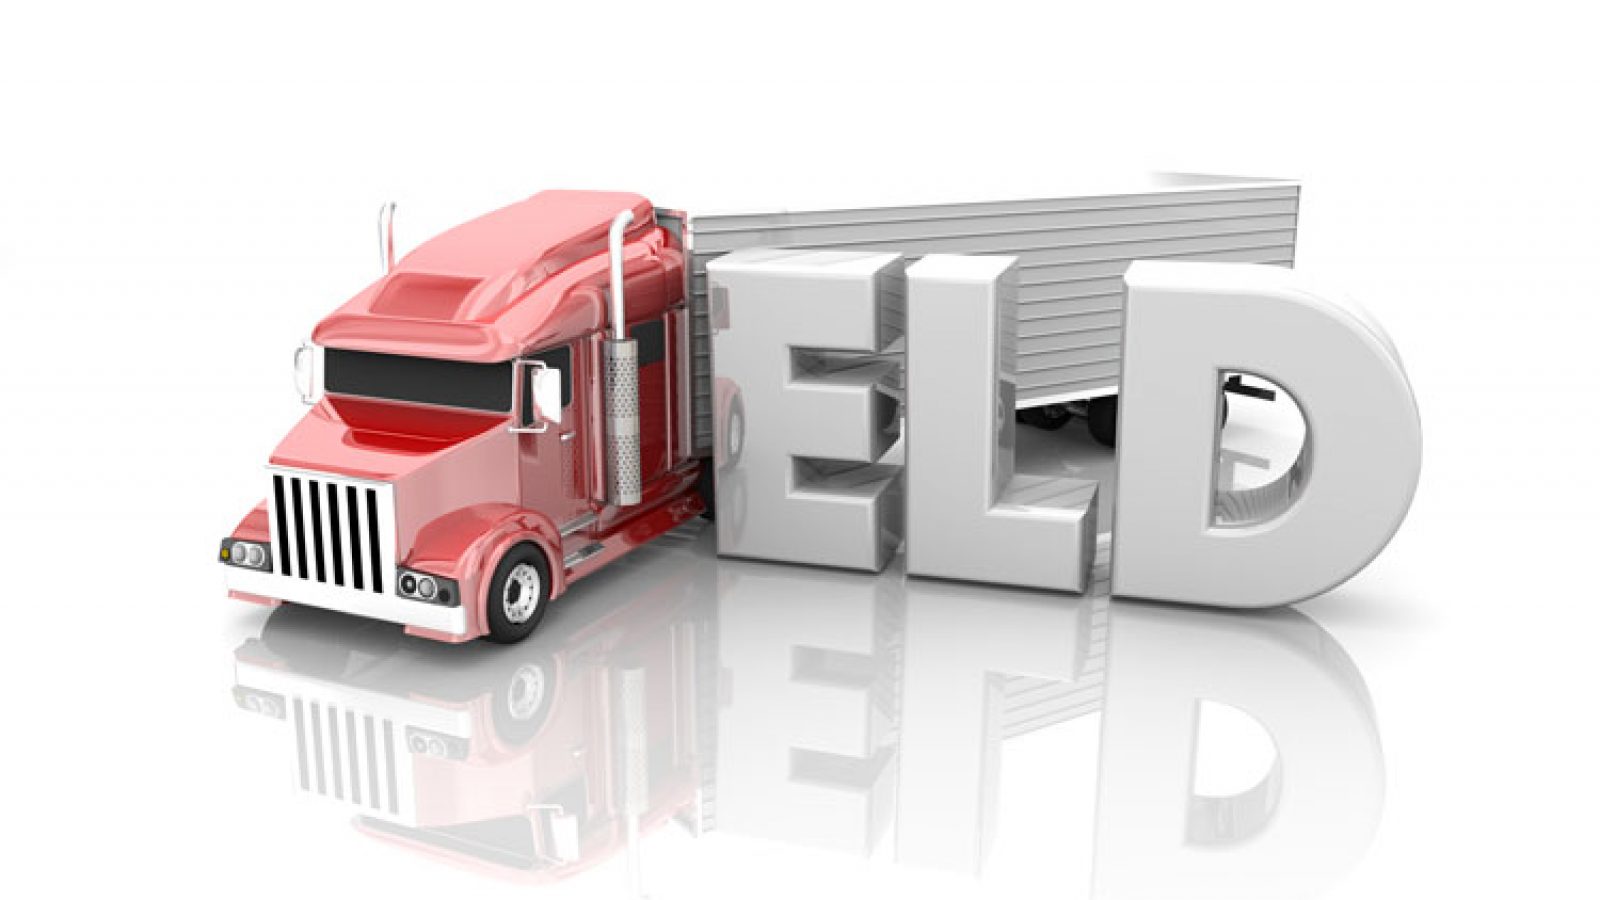 AOBRD Vs. ELD: What's The Difference?